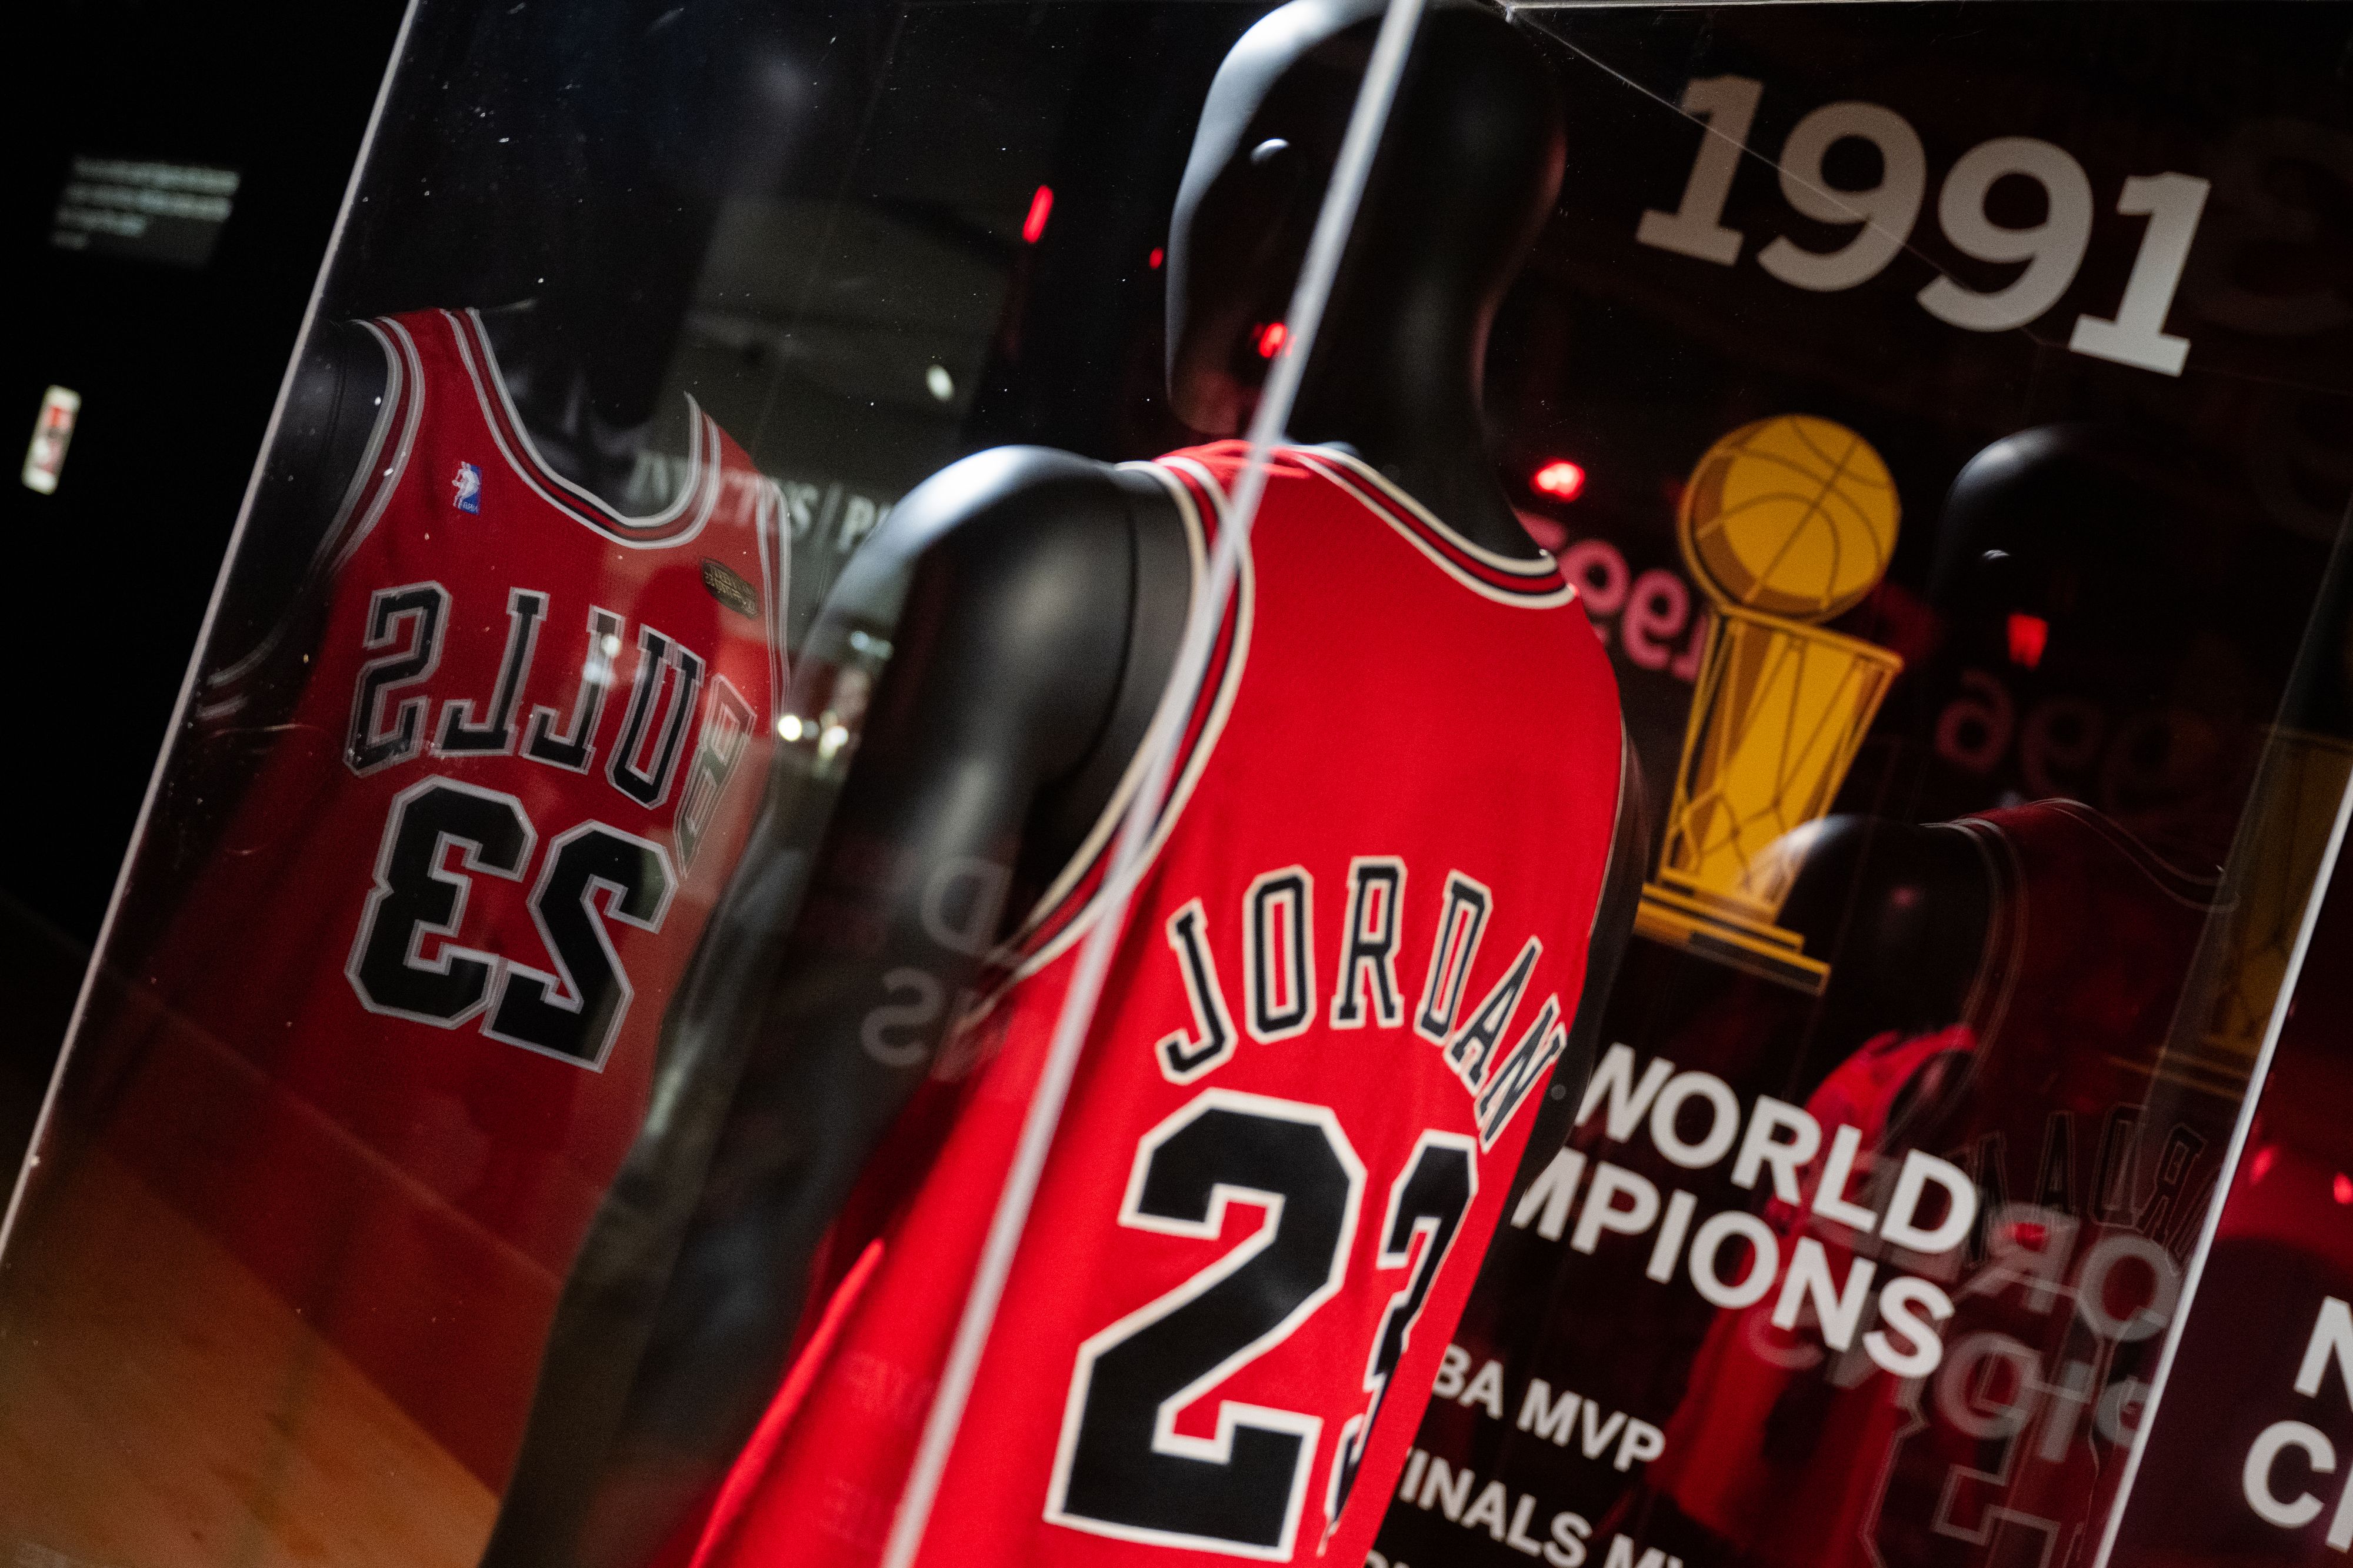 Game-Used MJ Jersey From1998 NBA Finals Heading to Auction